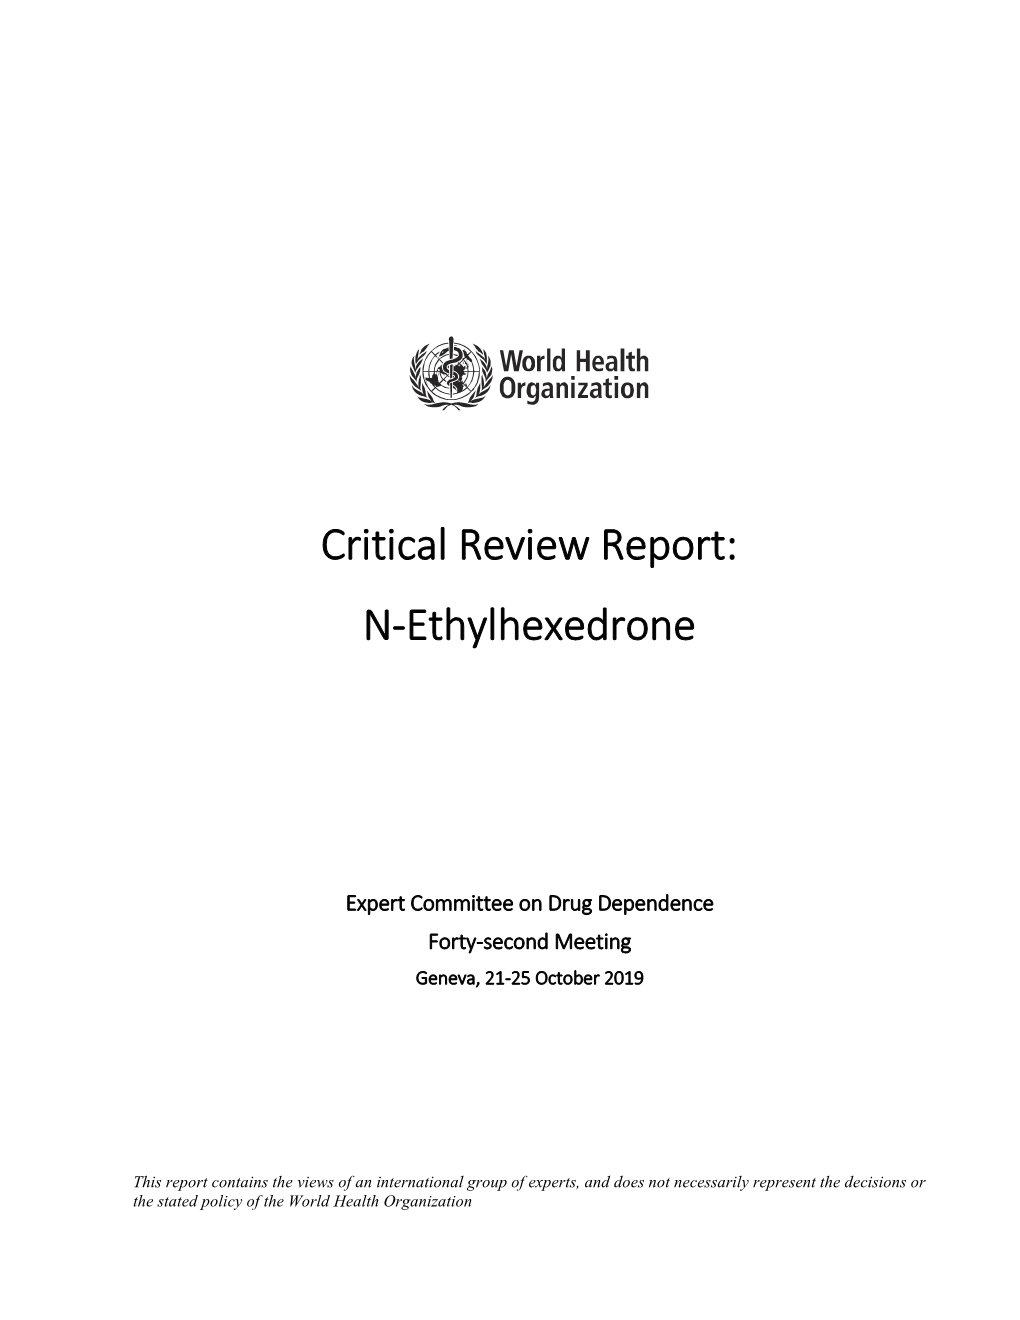 Critical Review Report: N-Ethylhexedrone